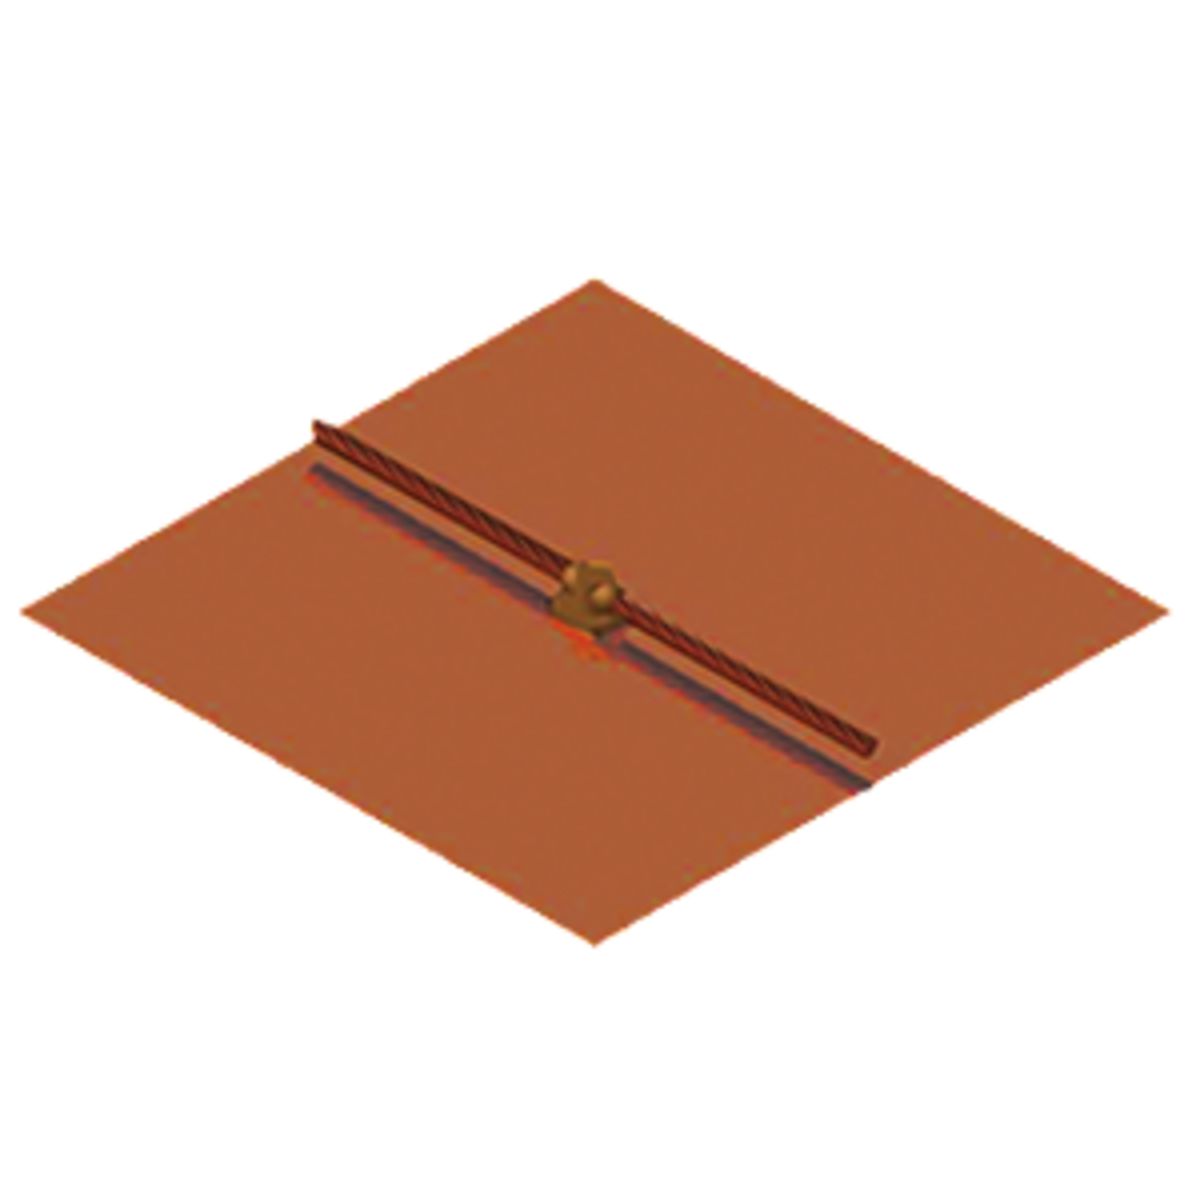 Copper Bonded Earth Plate - Axis Electricals